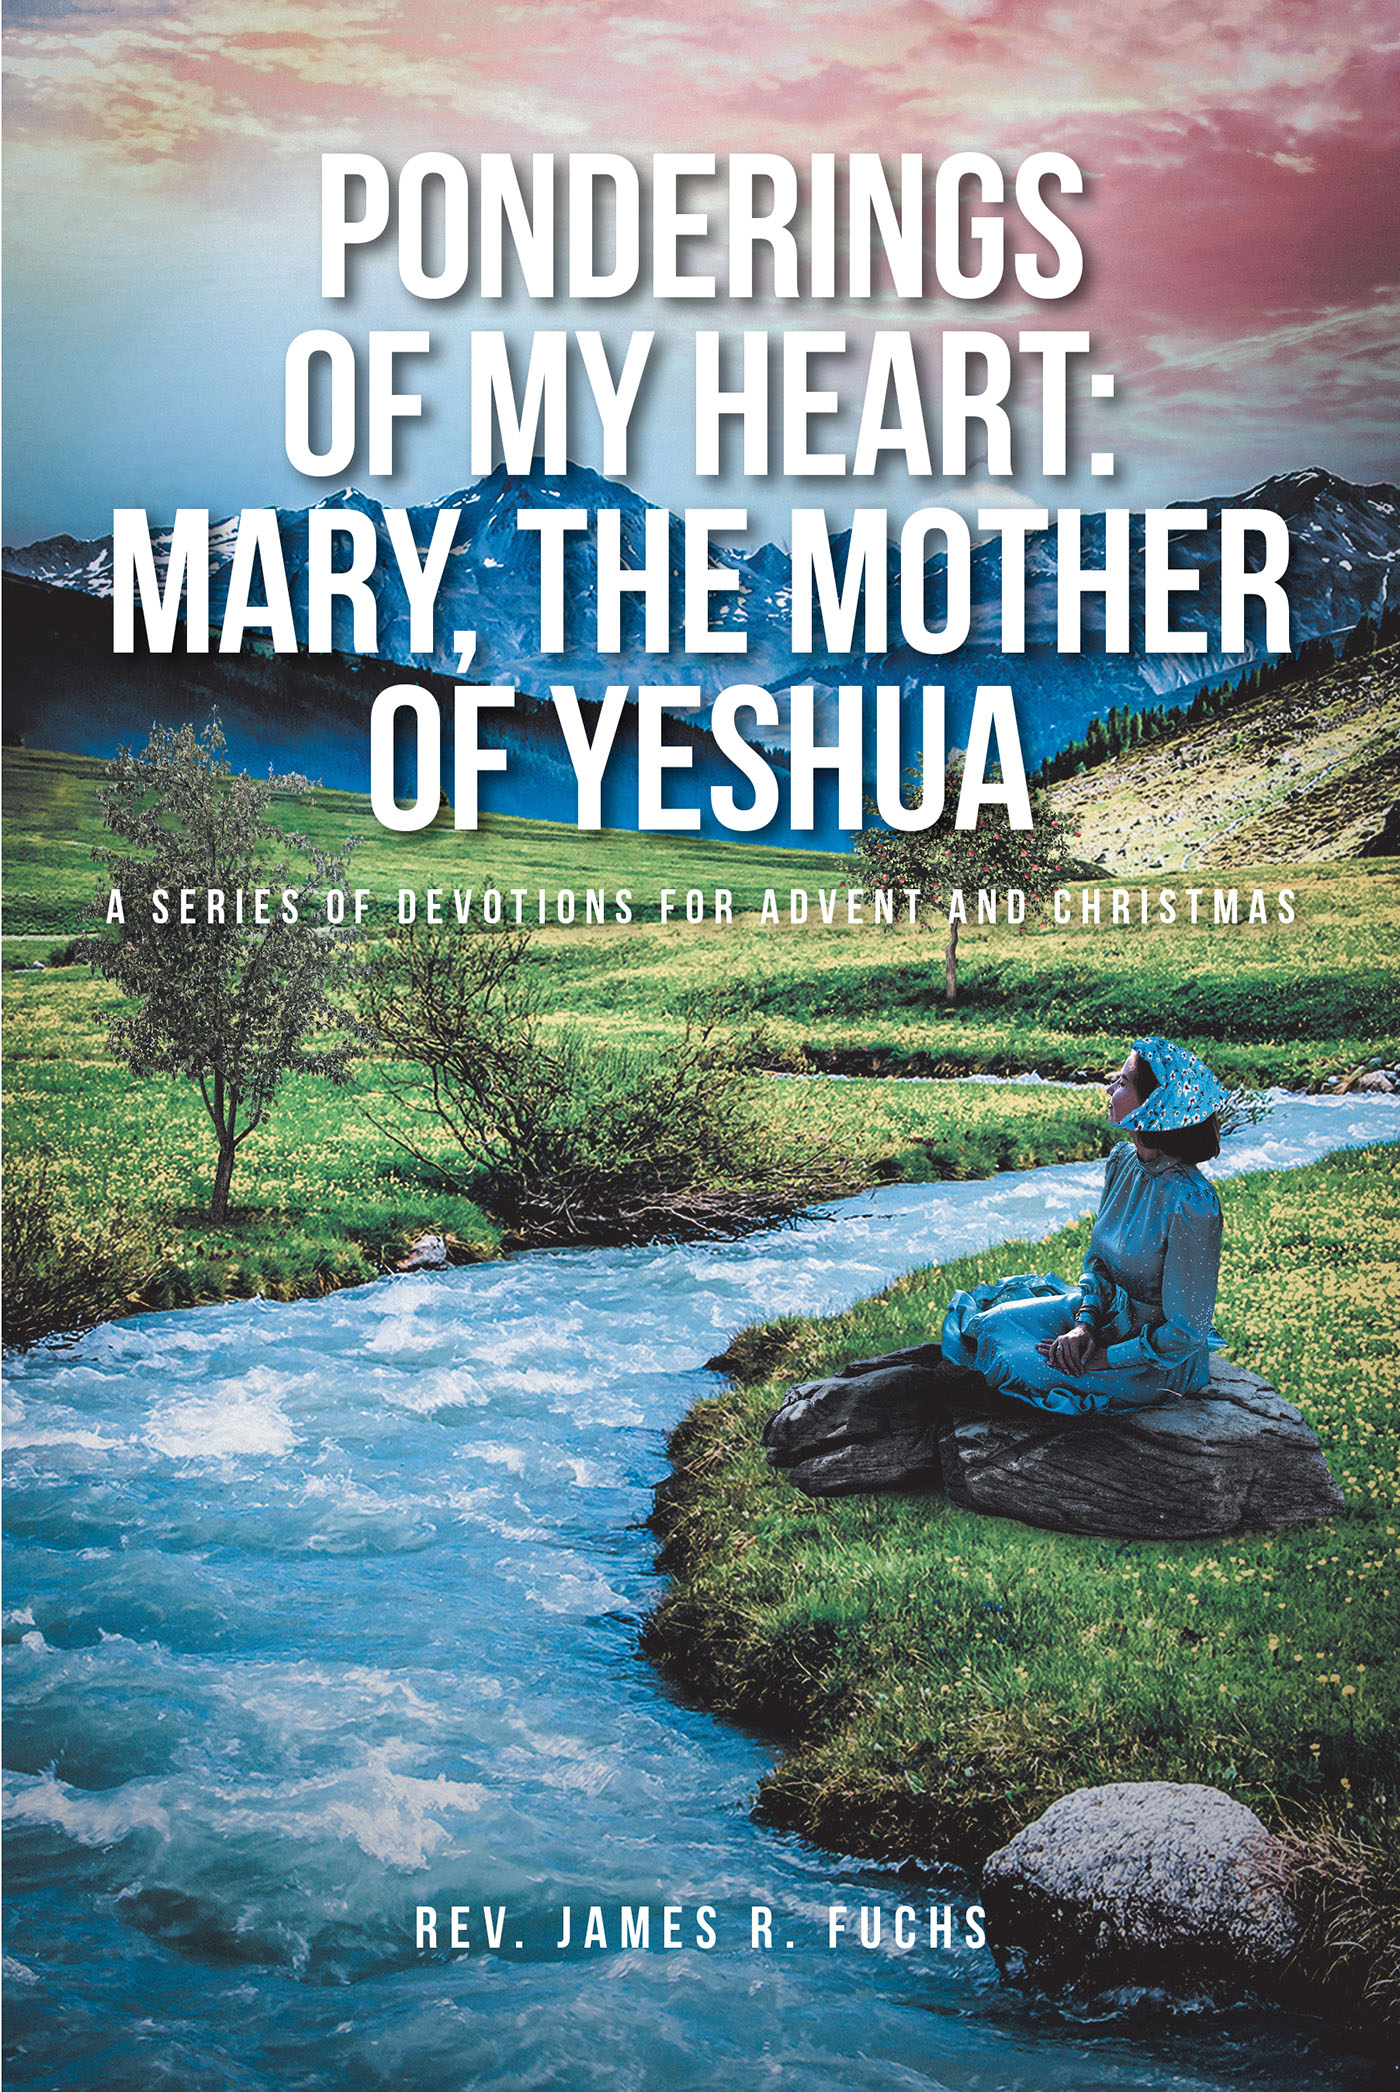 Rev. James R. Fuchs’s Newly Released "Ponderings of My Heart: Mary, the Mother of Yeshua" is an Engaging Collection of Devotions